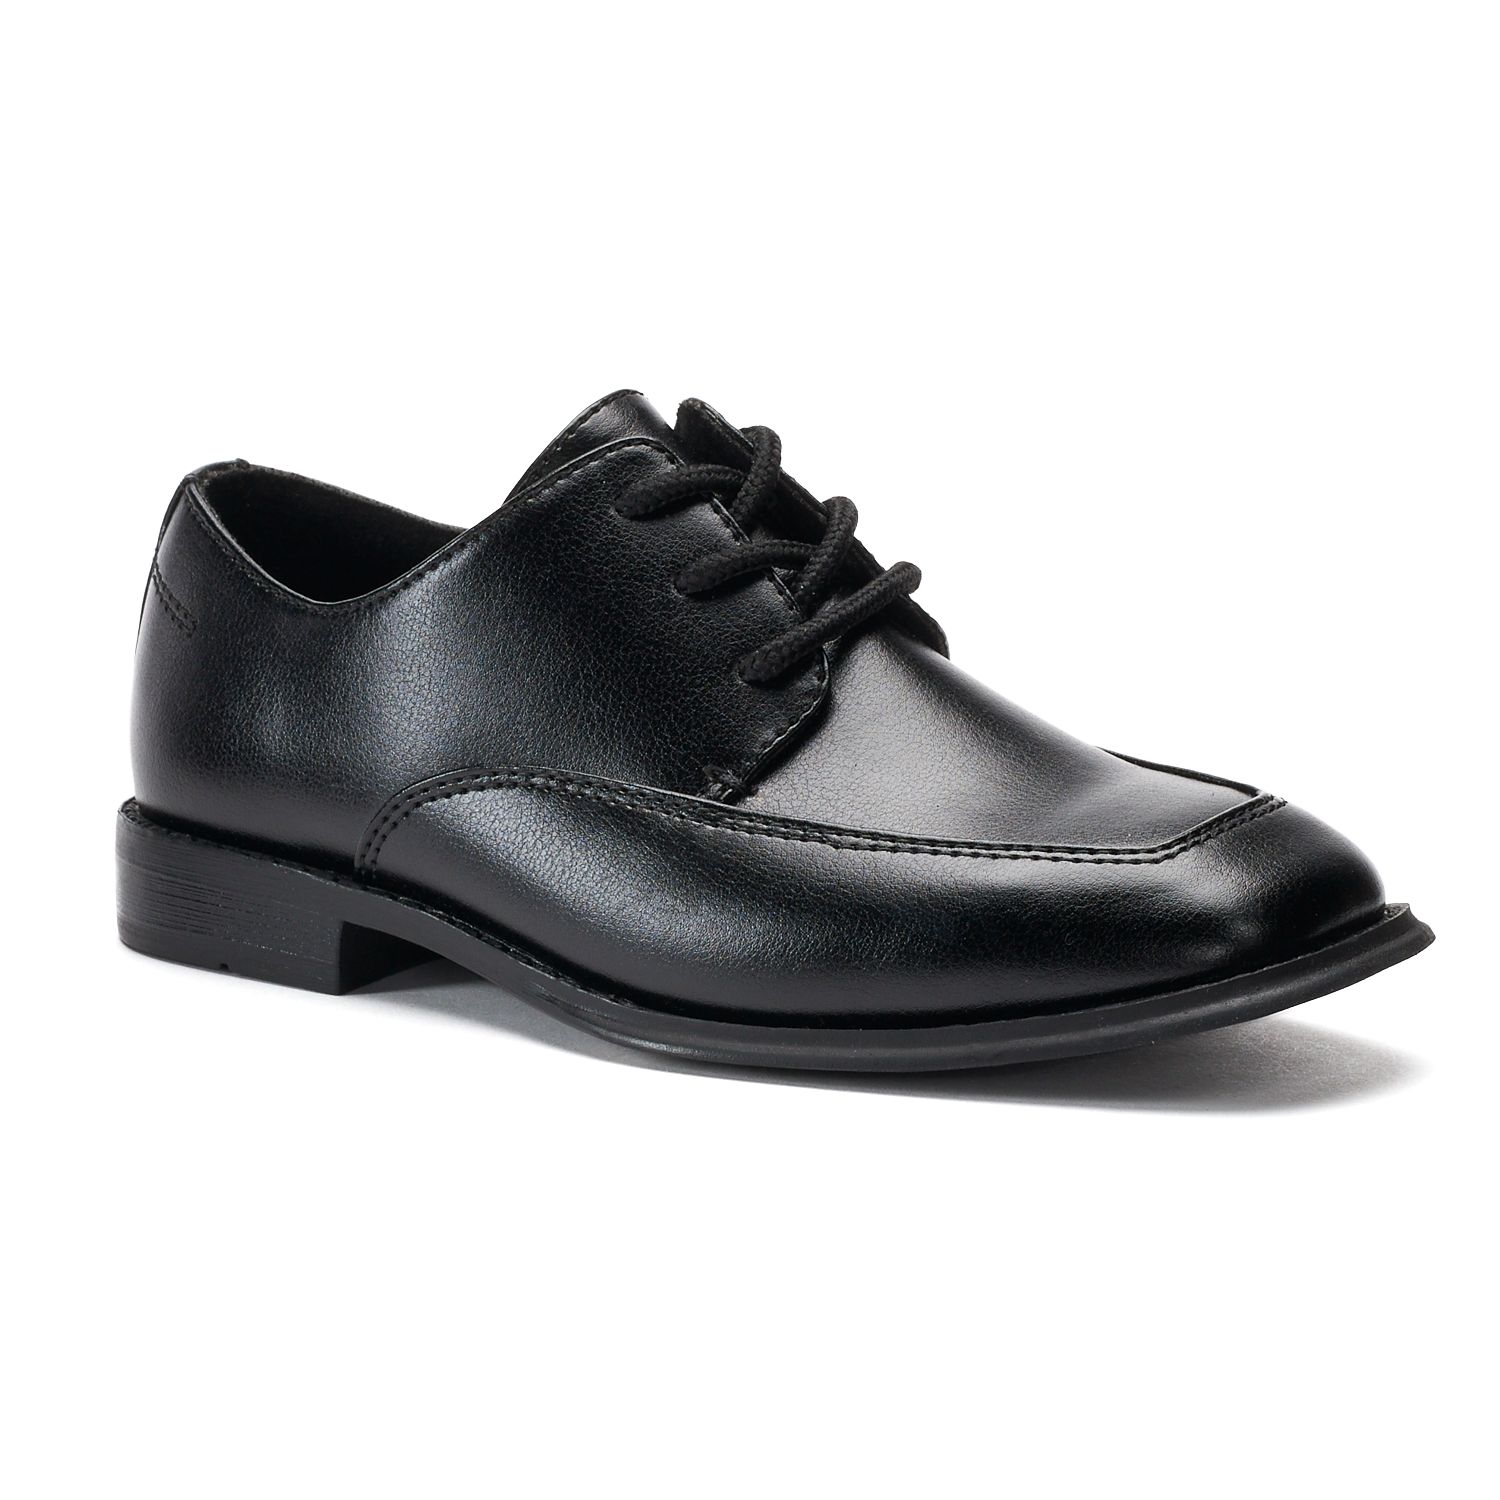 dress shoes for boys